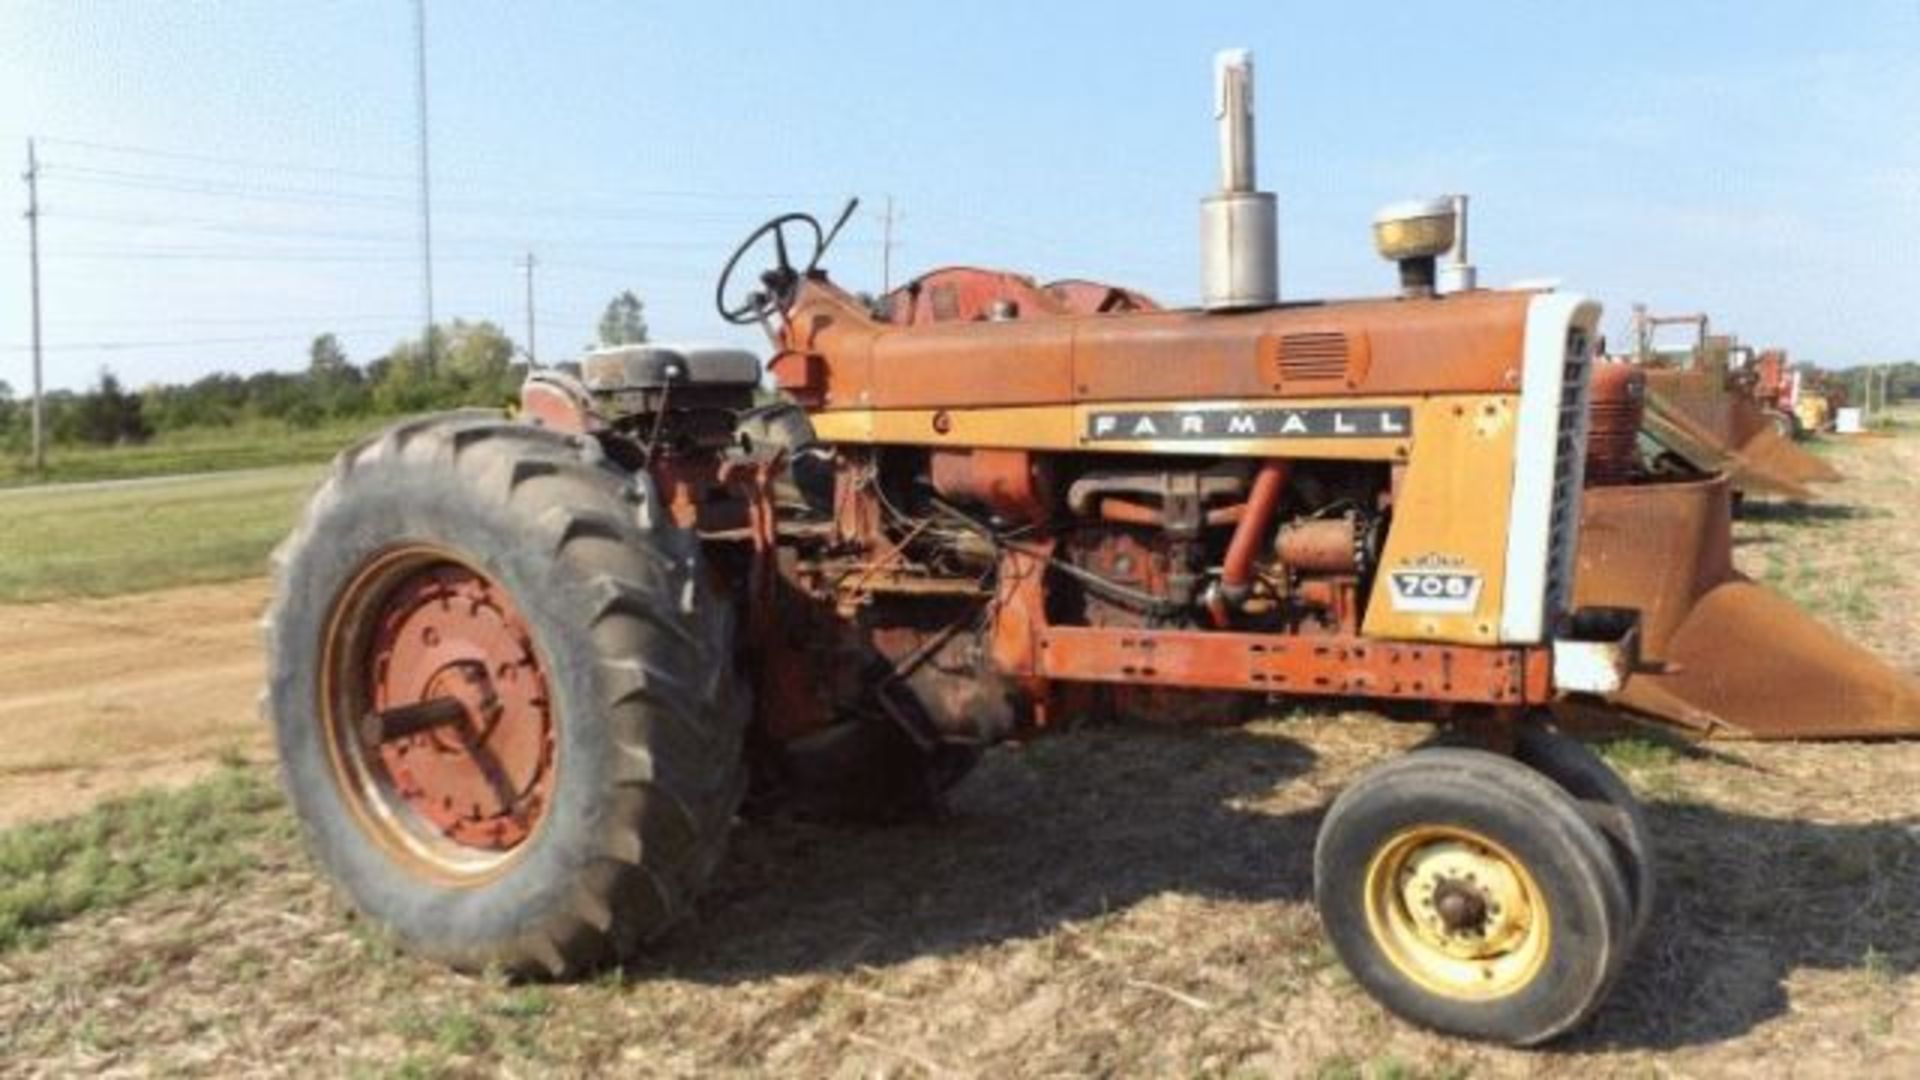 Lot 417 Farmall 706 Tractor Gas, Recent OH, Dual PTO, 1 SCV, 2pt, Fast Hitch, Good TA - Image 2 of 4